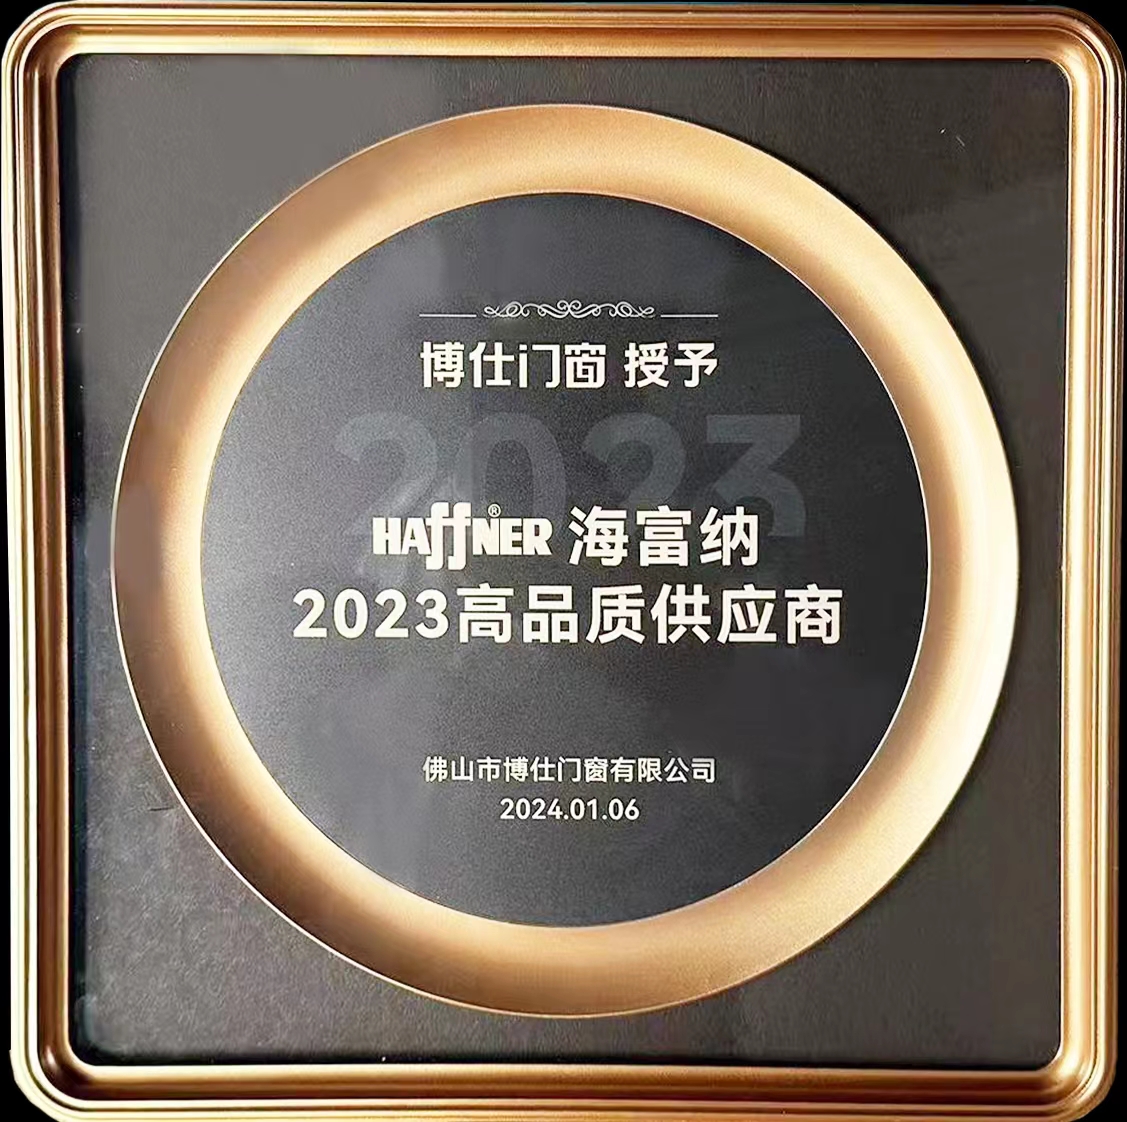 Haffner Group won the "2023 High Quality Supplier" award from Boshi Doors and Windows